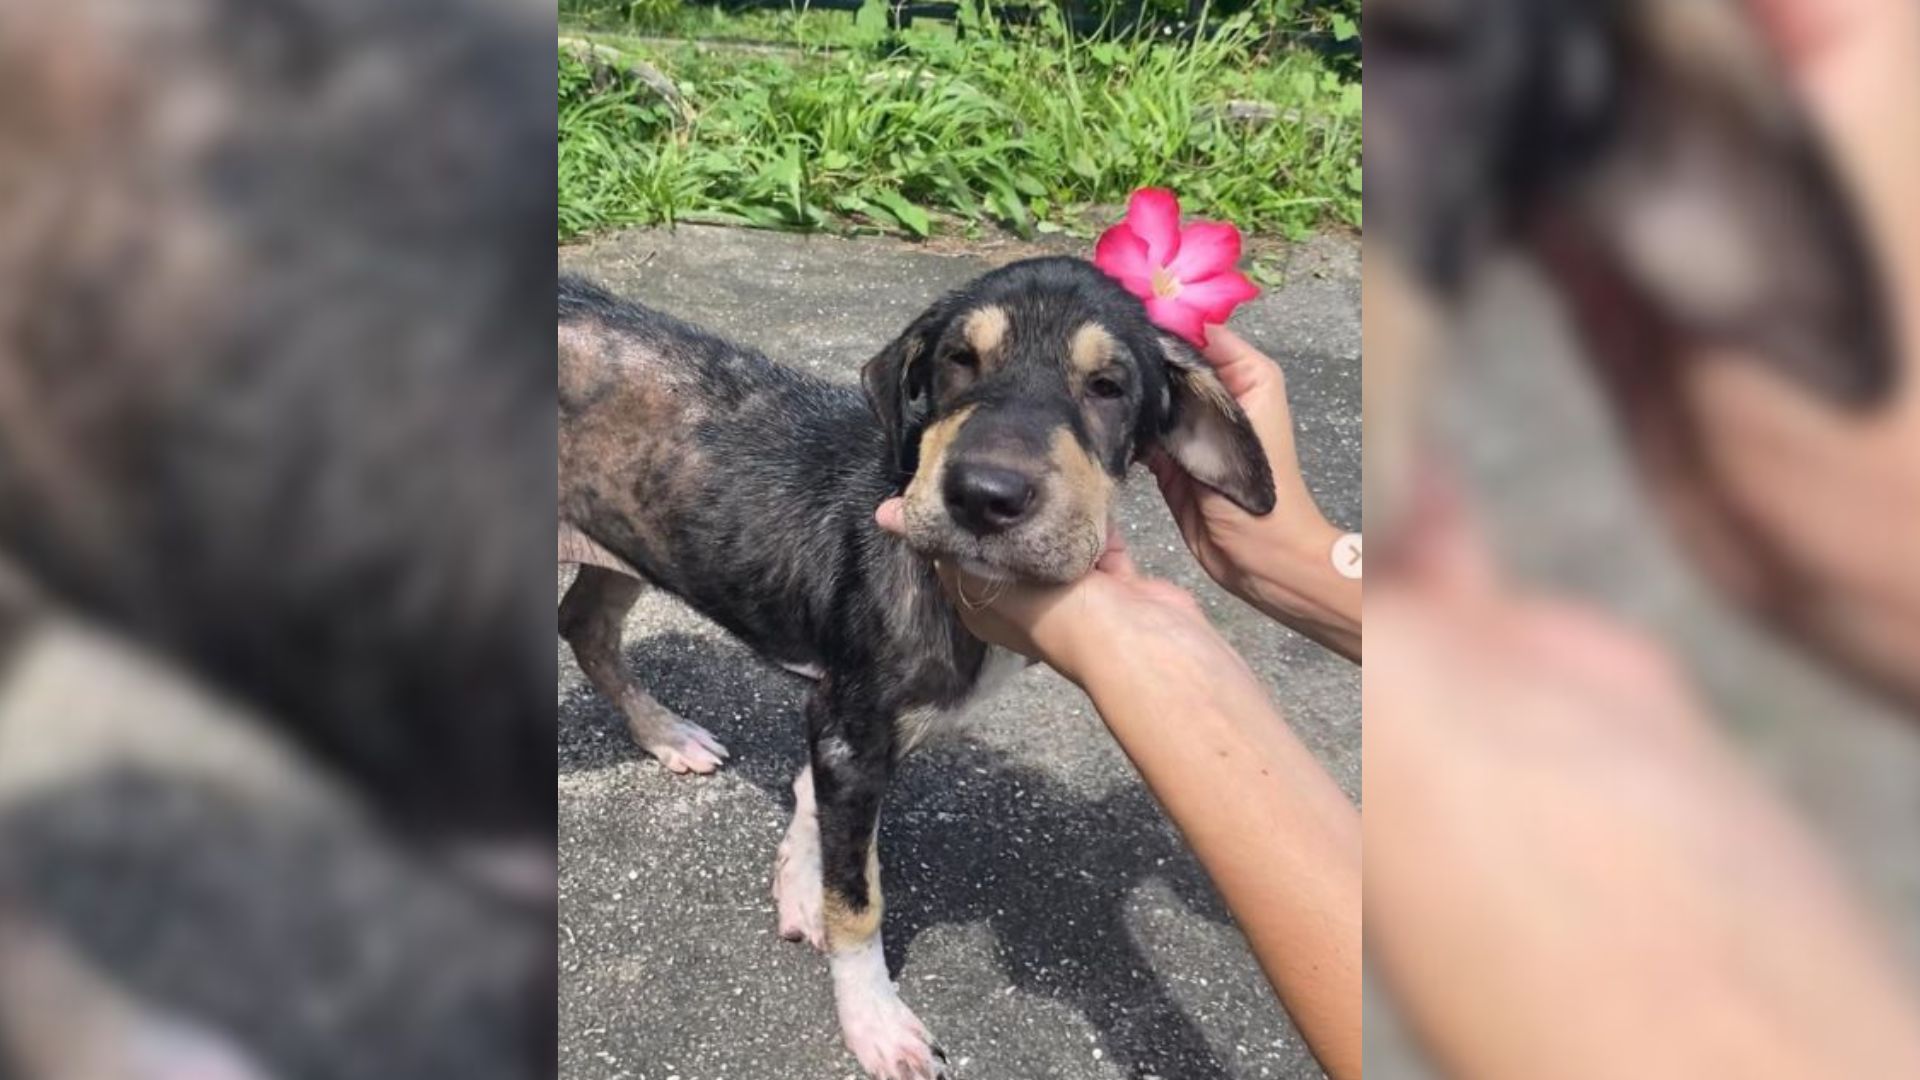 Skinny Puppy Diagnosed With A Serious Skin Condition Undergoes The Heartwarming Transformation